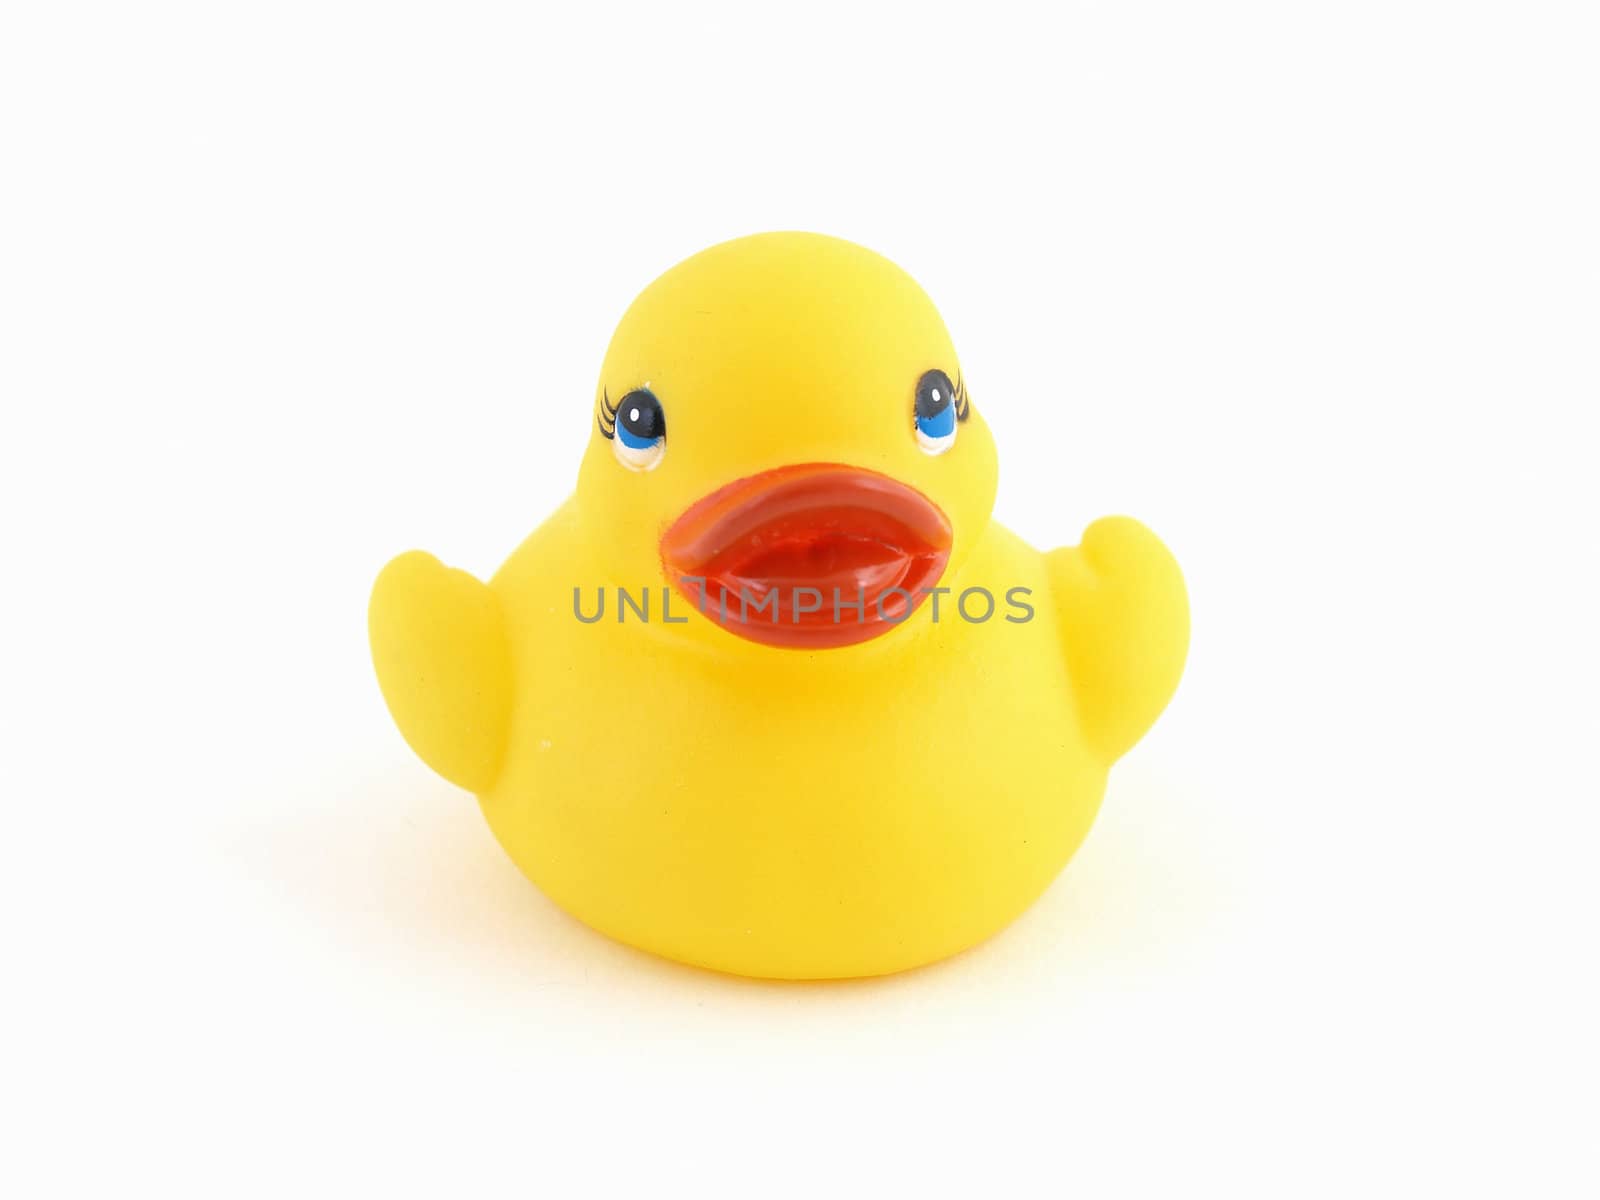 A small yellow rubber duck isolated against a white background.